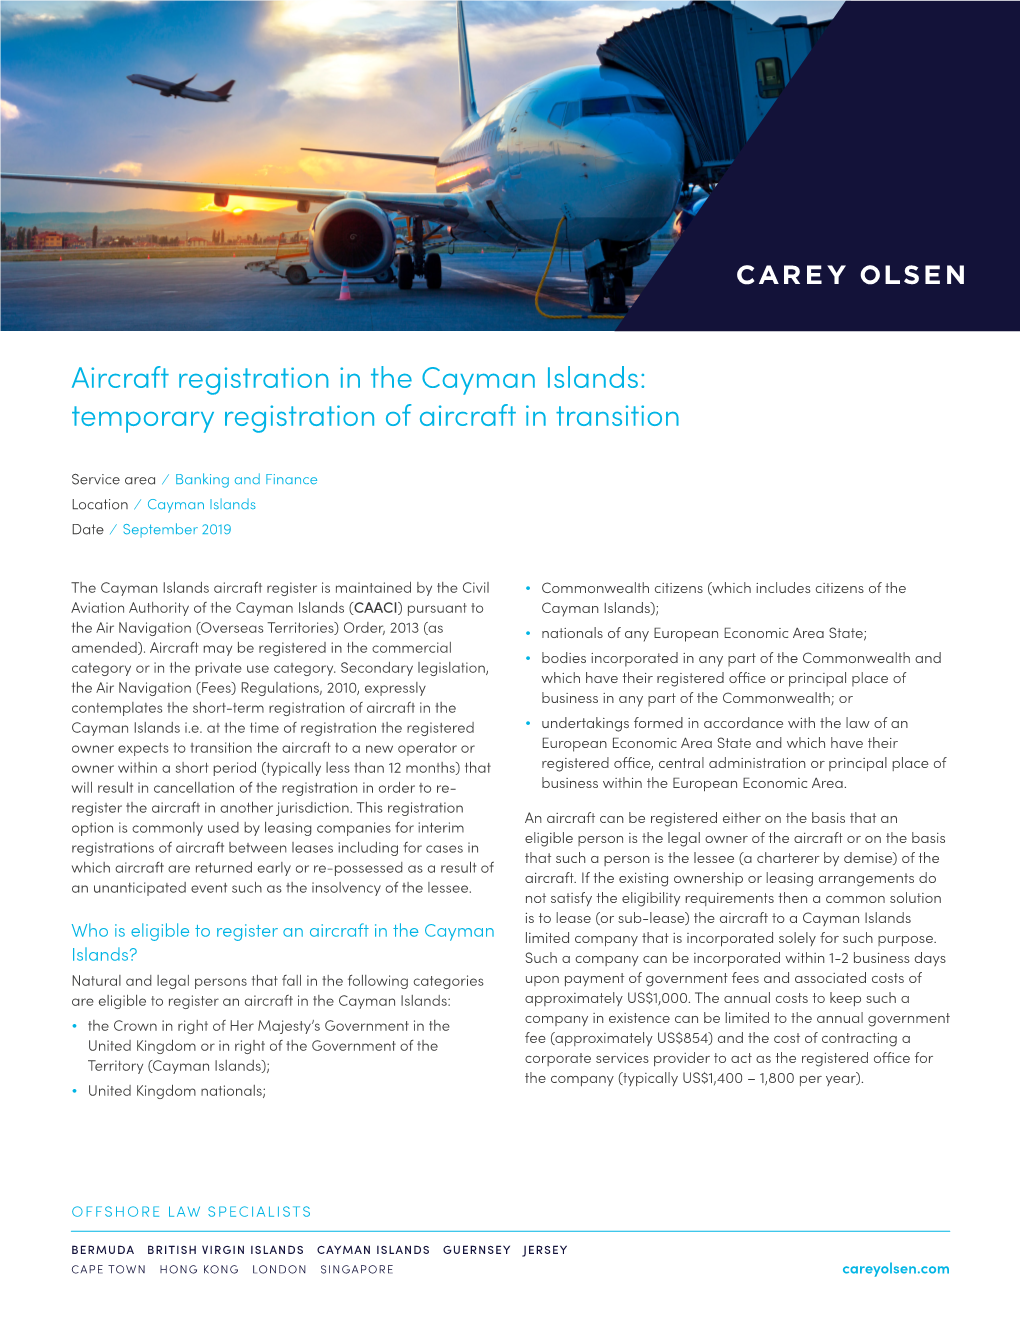 Aircraft Registration in the Cayman Islands: Temporary Registration of Aircraft in Transition